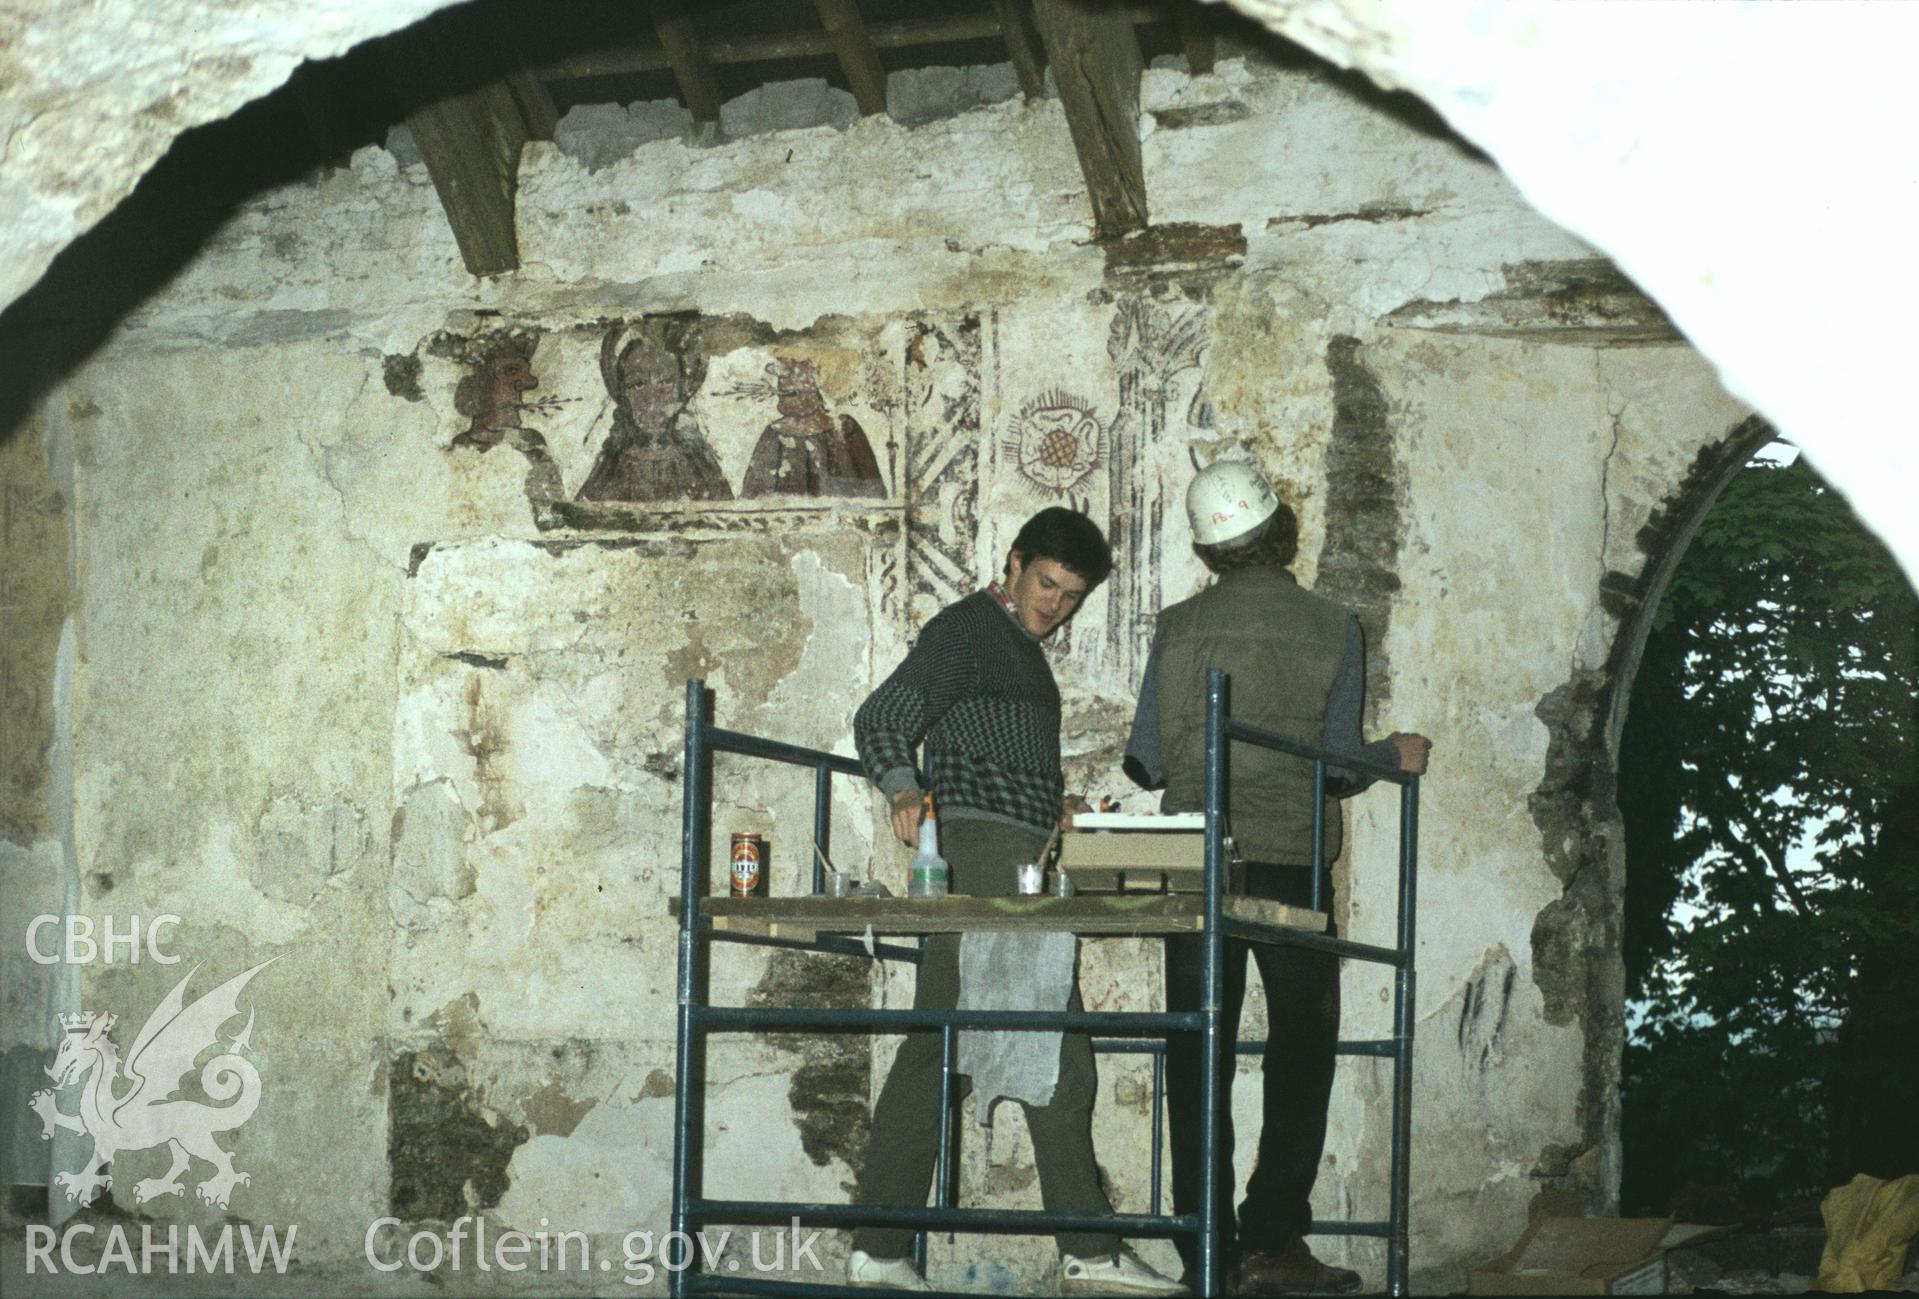 RCAHMW colour transparency showing conservationists at work on the wallpaintings at St Teilo's Church, Llandeilo Talybont, photographed in 1984.